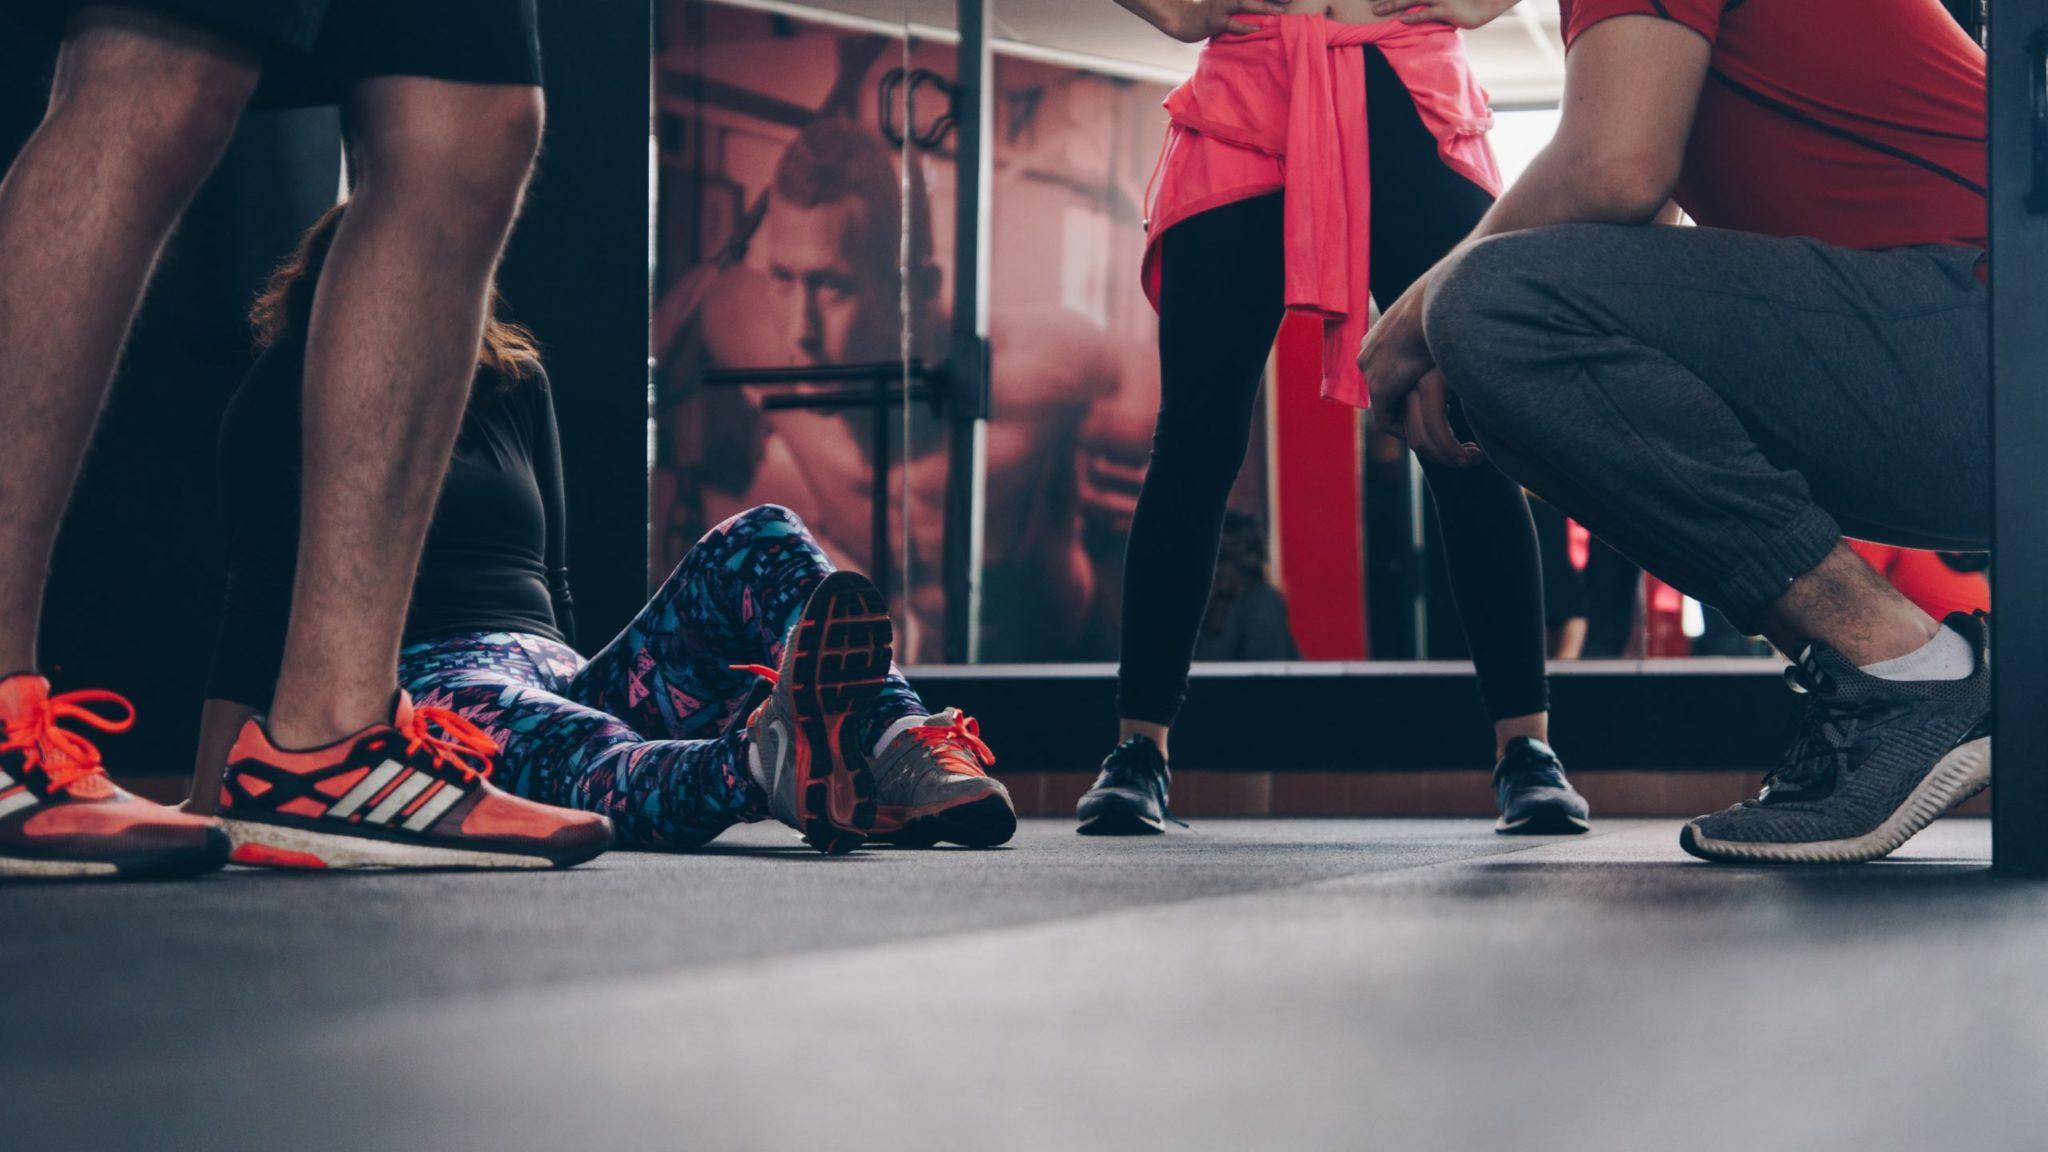 Fitness, Health & Wellbeing  Adidas Is Launching a Clothing Line